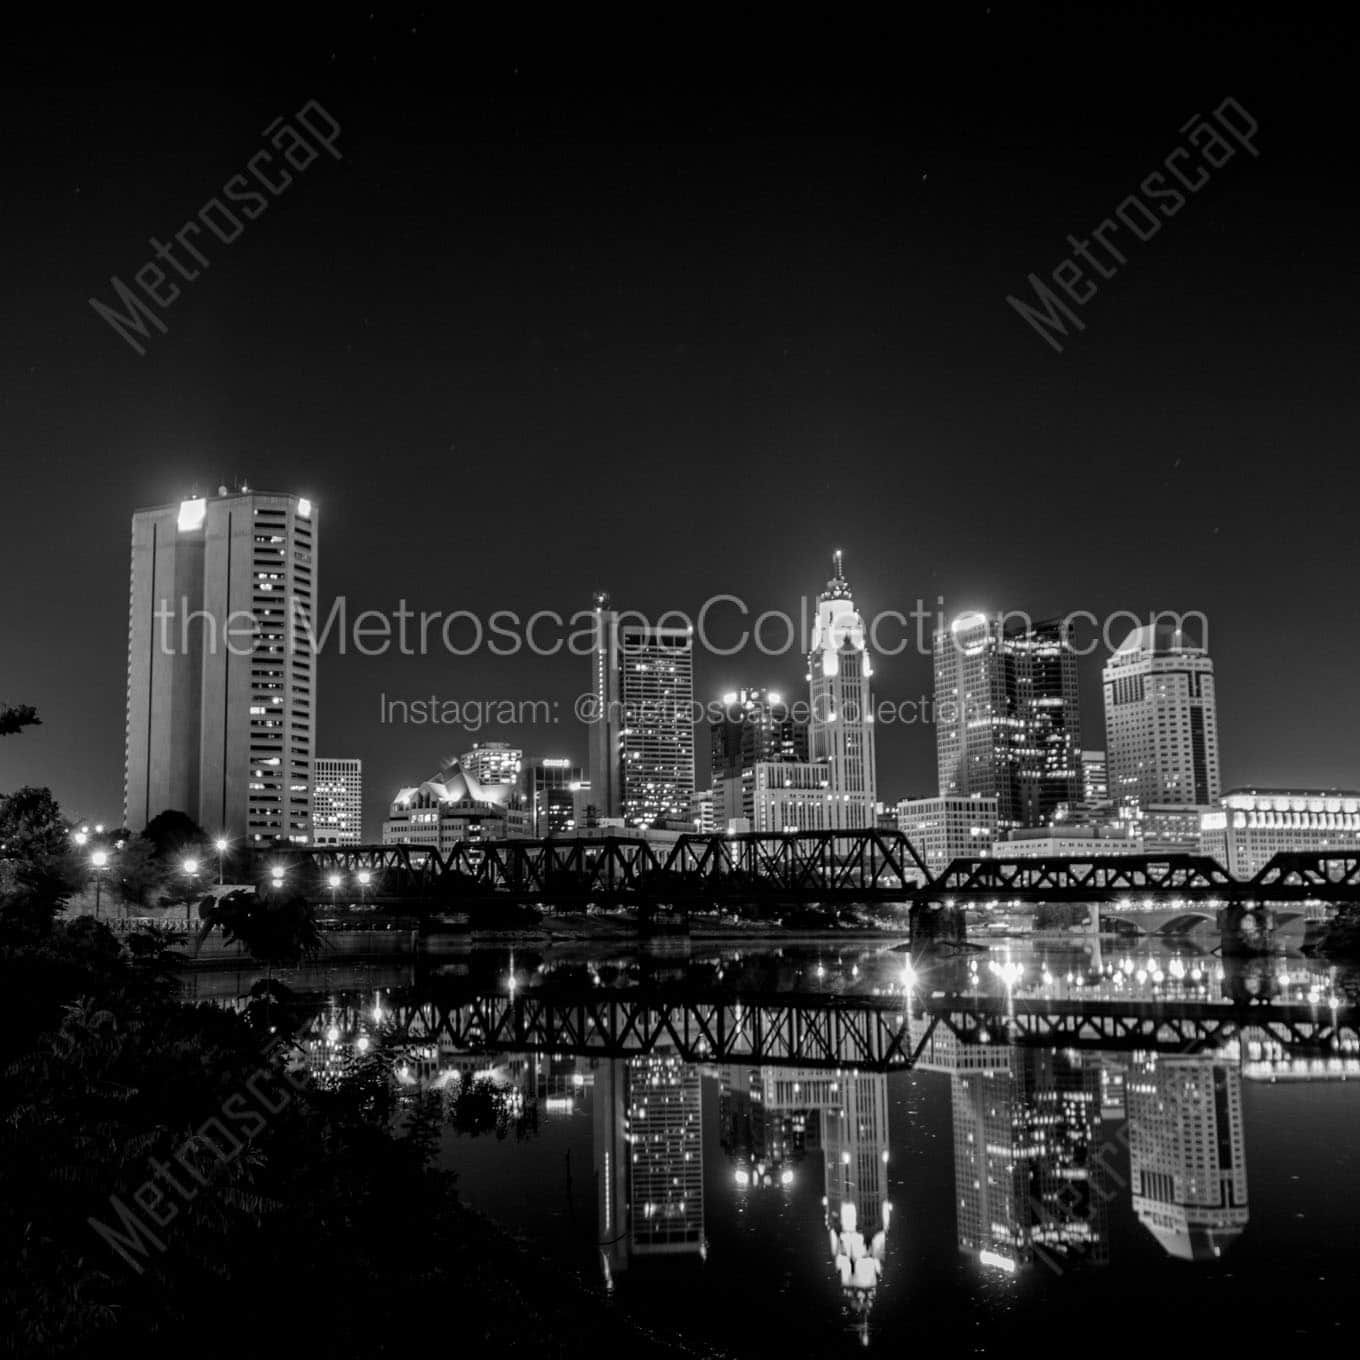 columbus skyline reflecting in scioto river at night Black & White Wall Art